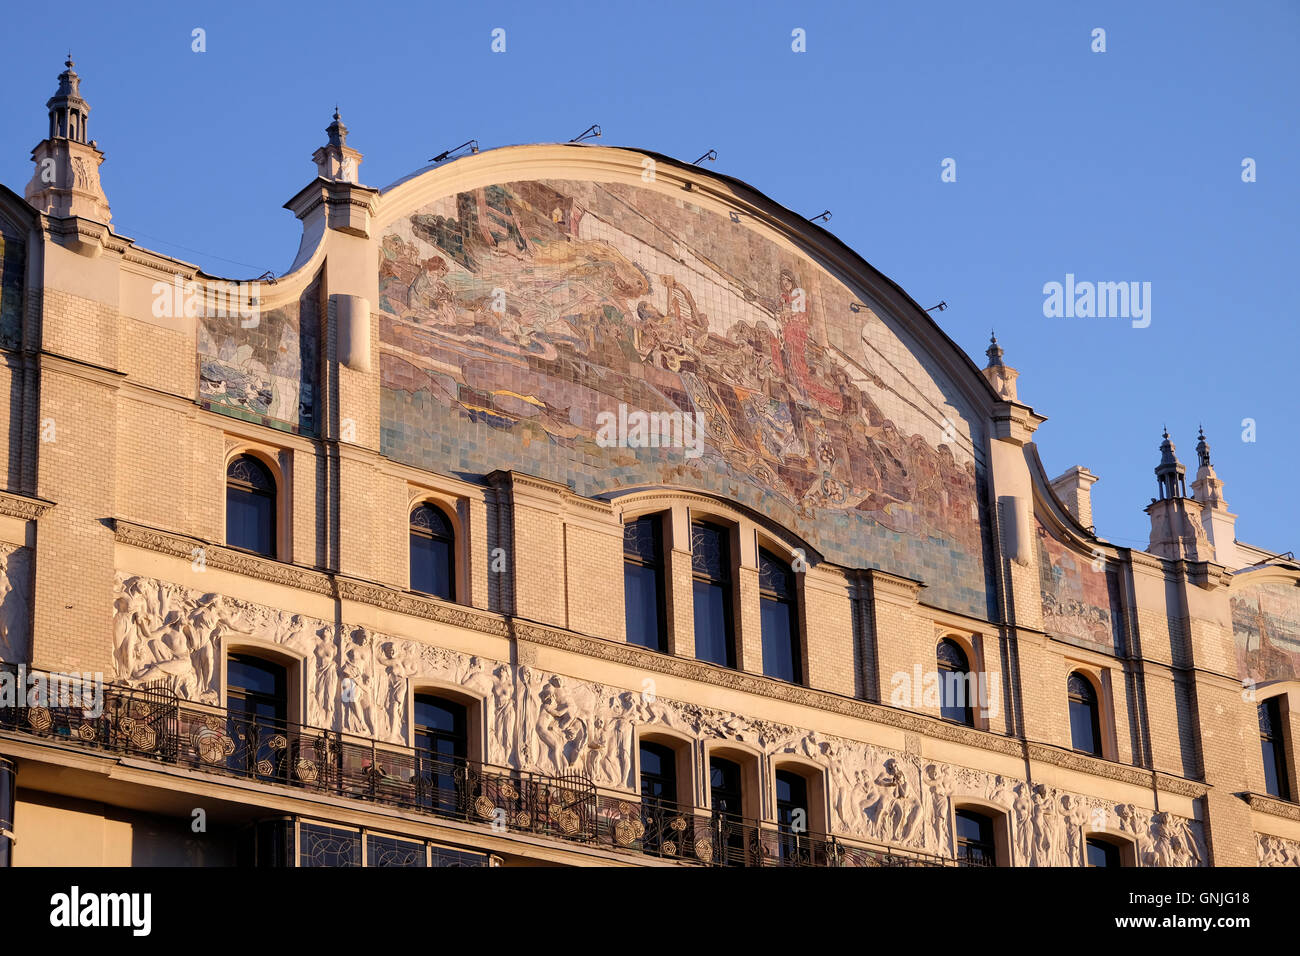 Princess of Dreams mosaic in facade of Metropol hotel built in 1907 in Art Nouveau style in Teatralnyy street central Moscow Russia Stock Photo